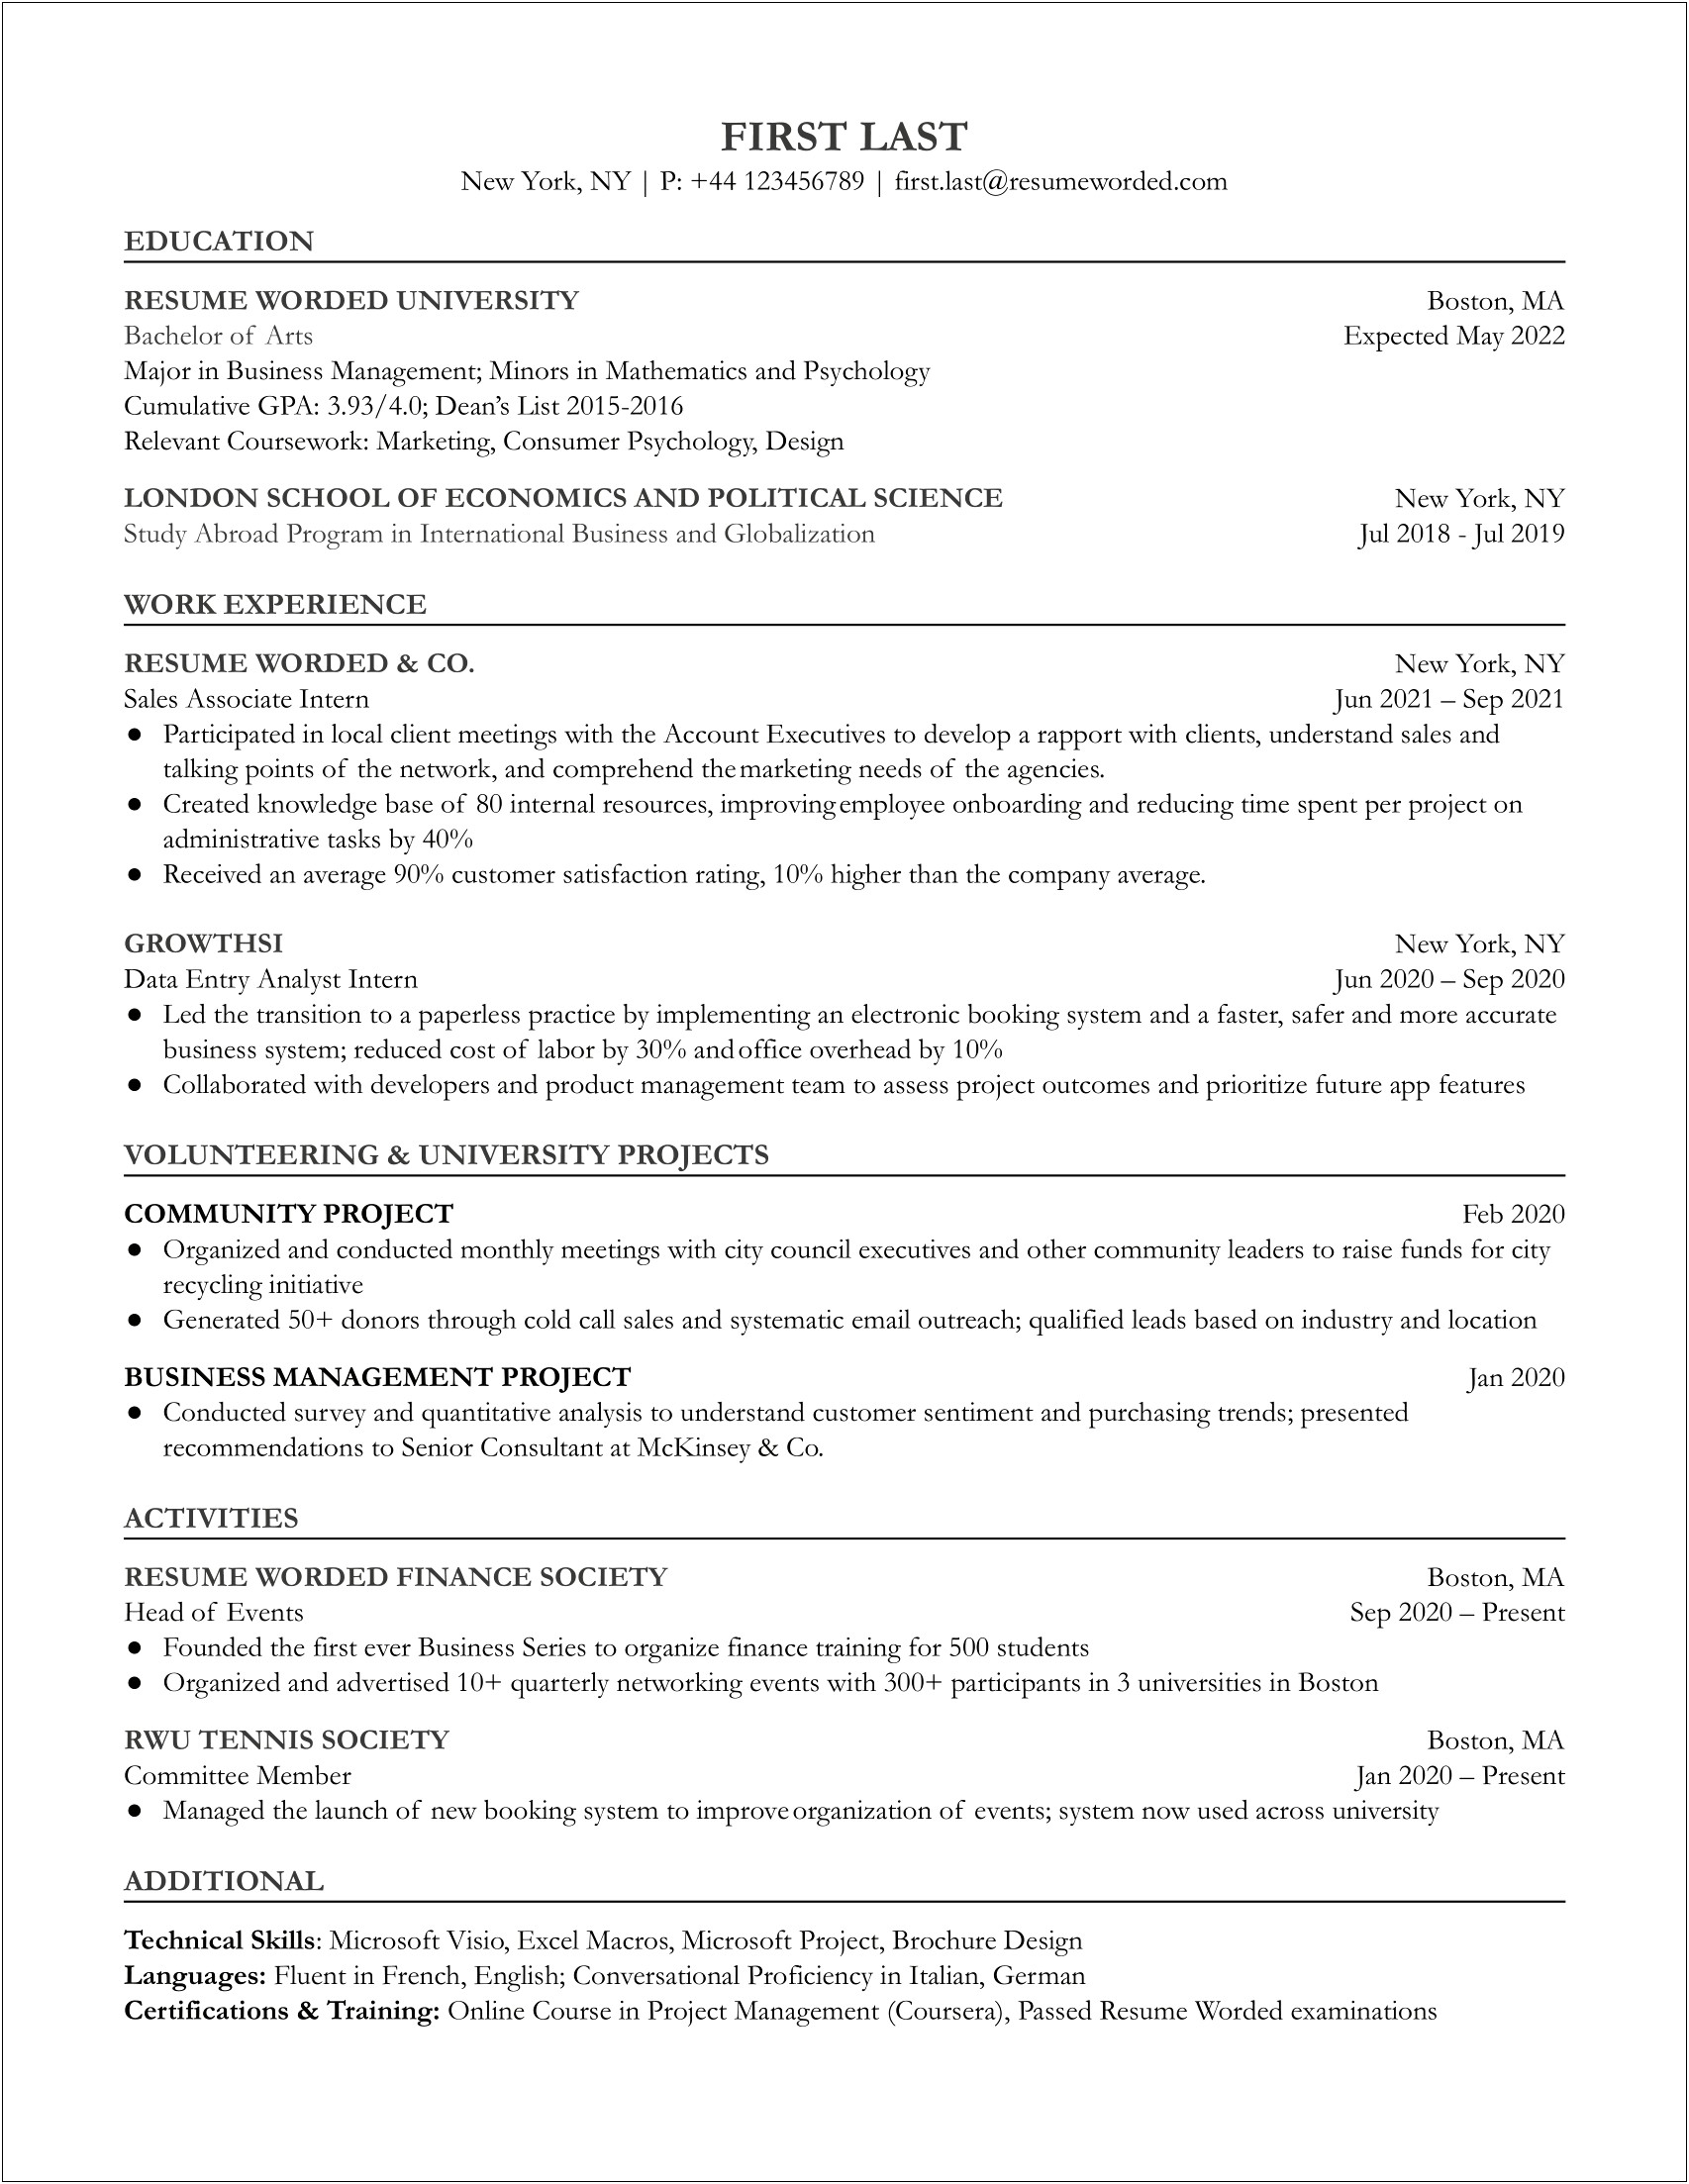 Resume Template For Entry Level Sales